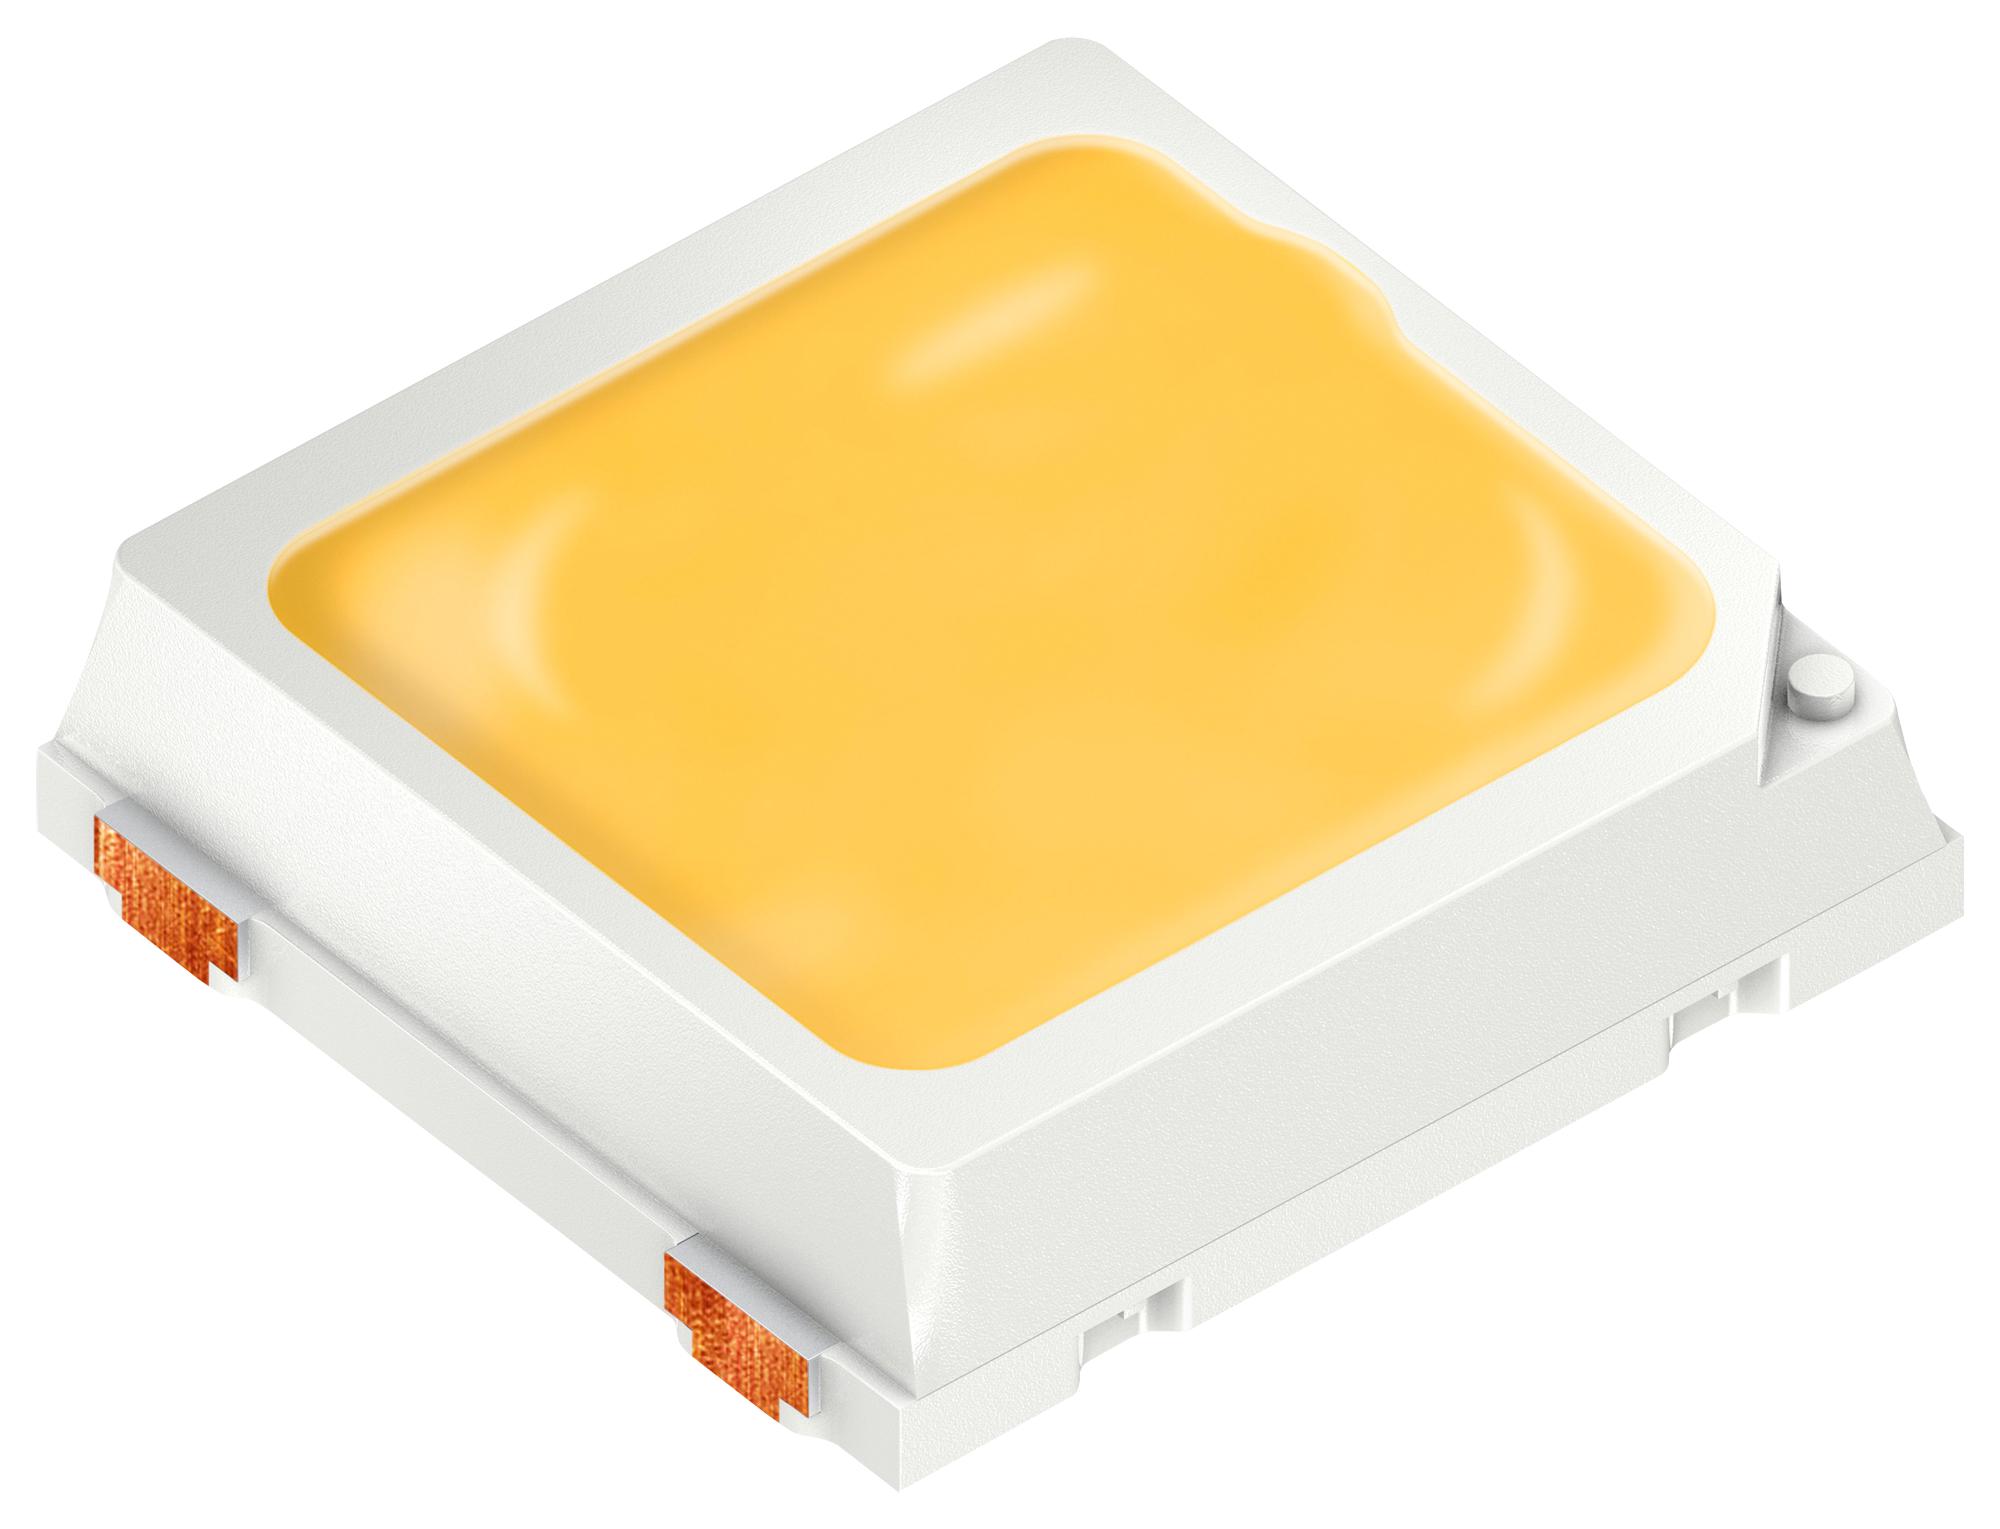 Ams Osram Group Gw Qslms2.em-H6H9-Xx31-1U1V-65-R18 Led, 3.2 X 3mm, Cool White, 42Lm